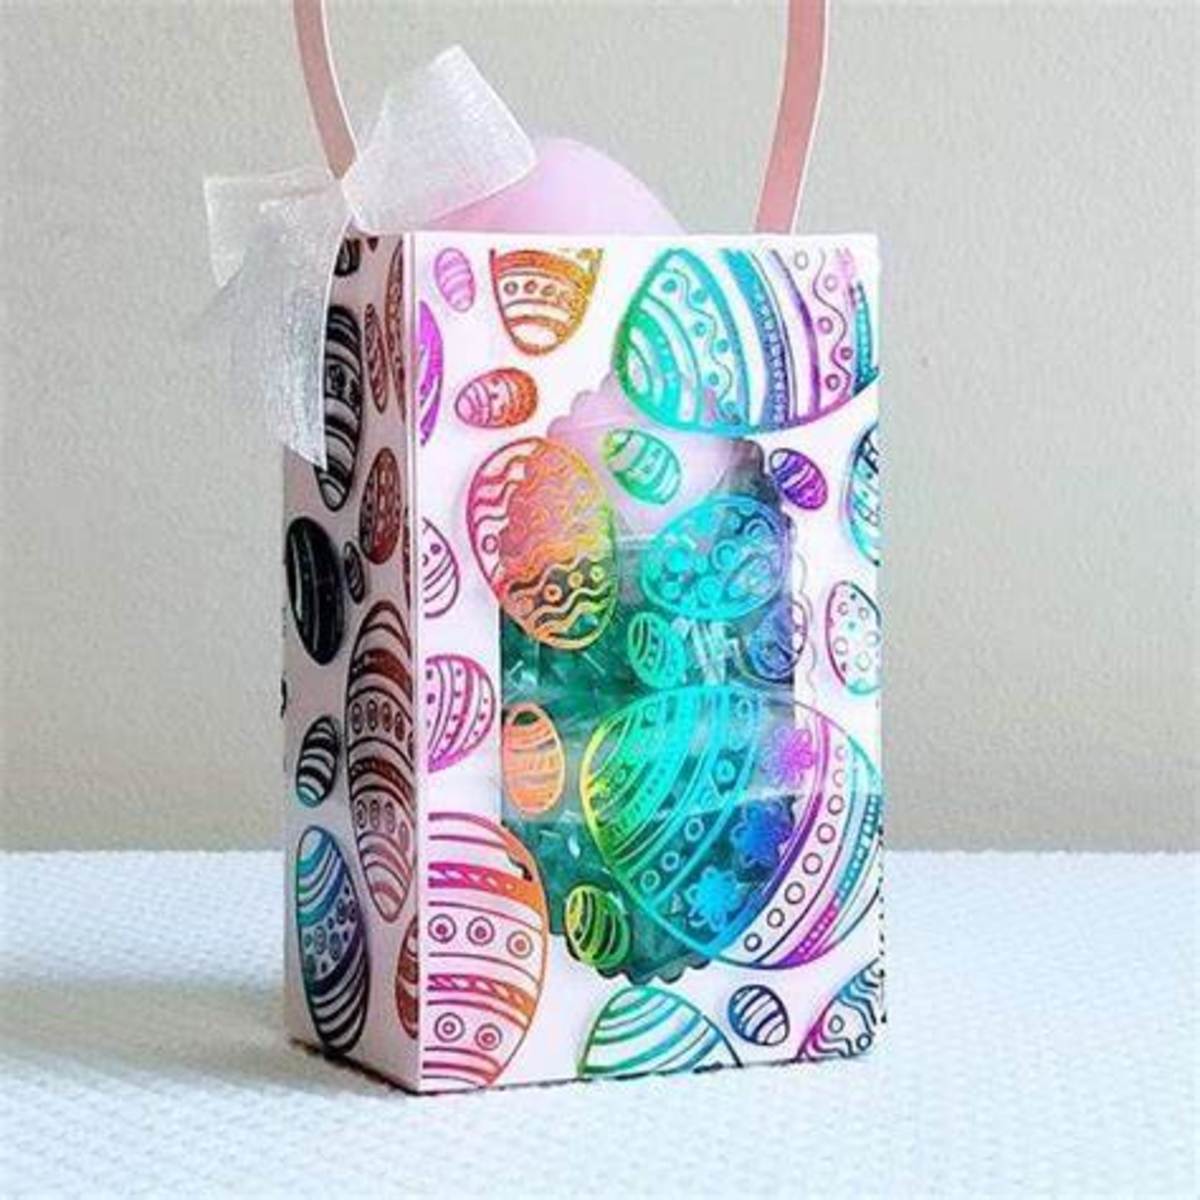 You can create other papercraft projects with designer toner sheets